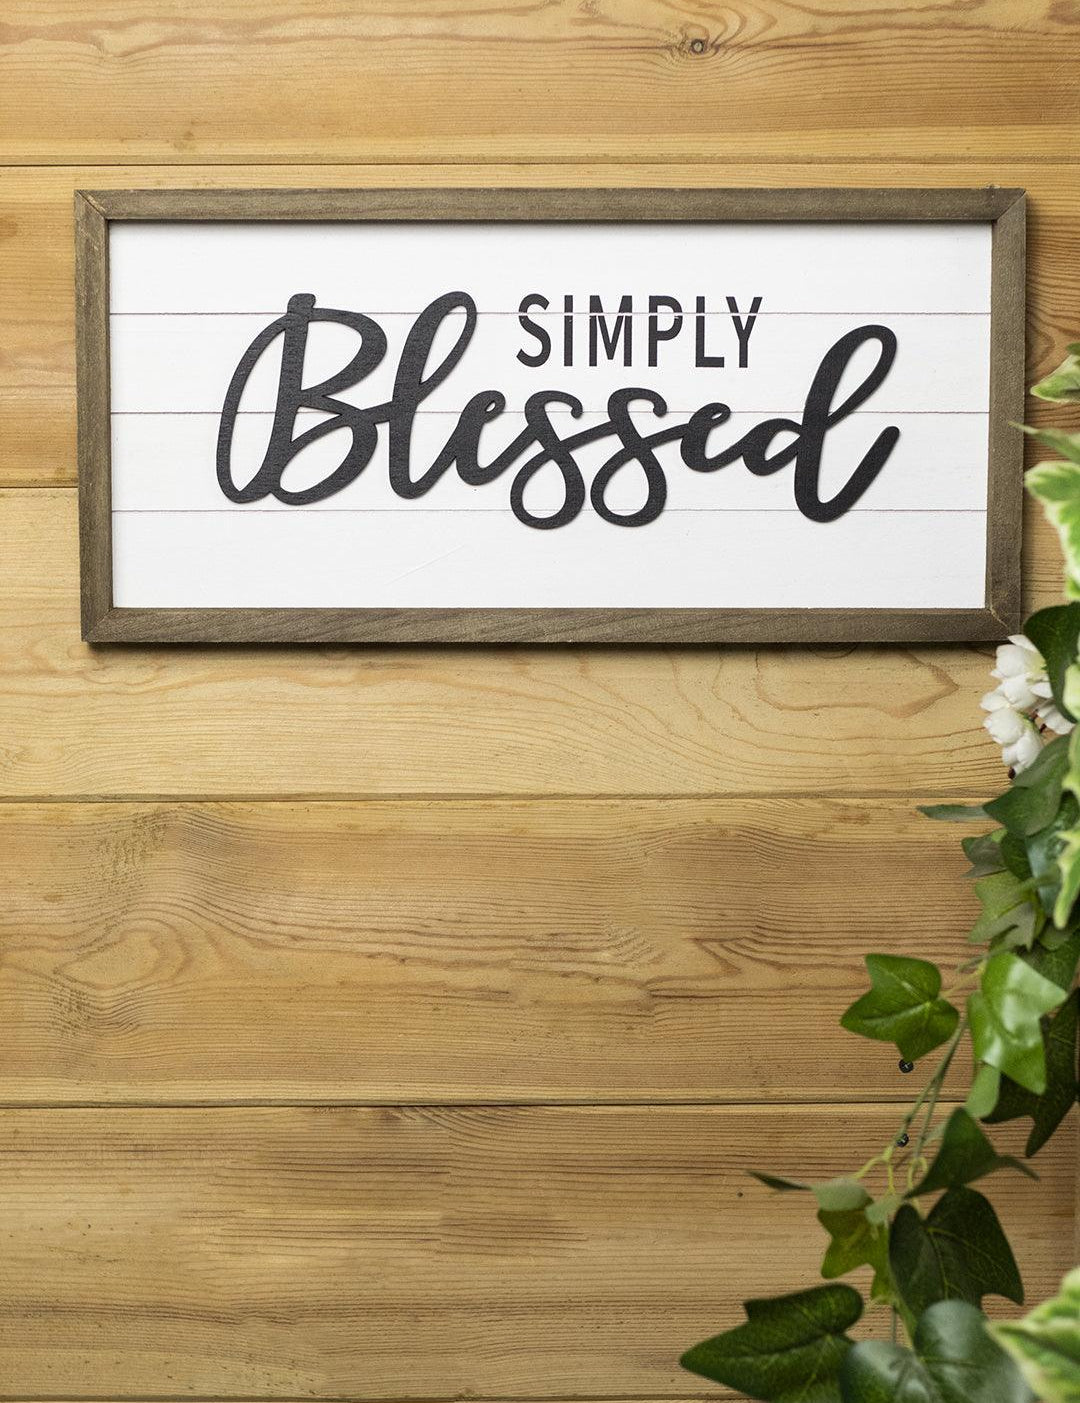 Decorative Wall Plaques - SIMPLY Blessed - MARKET 99